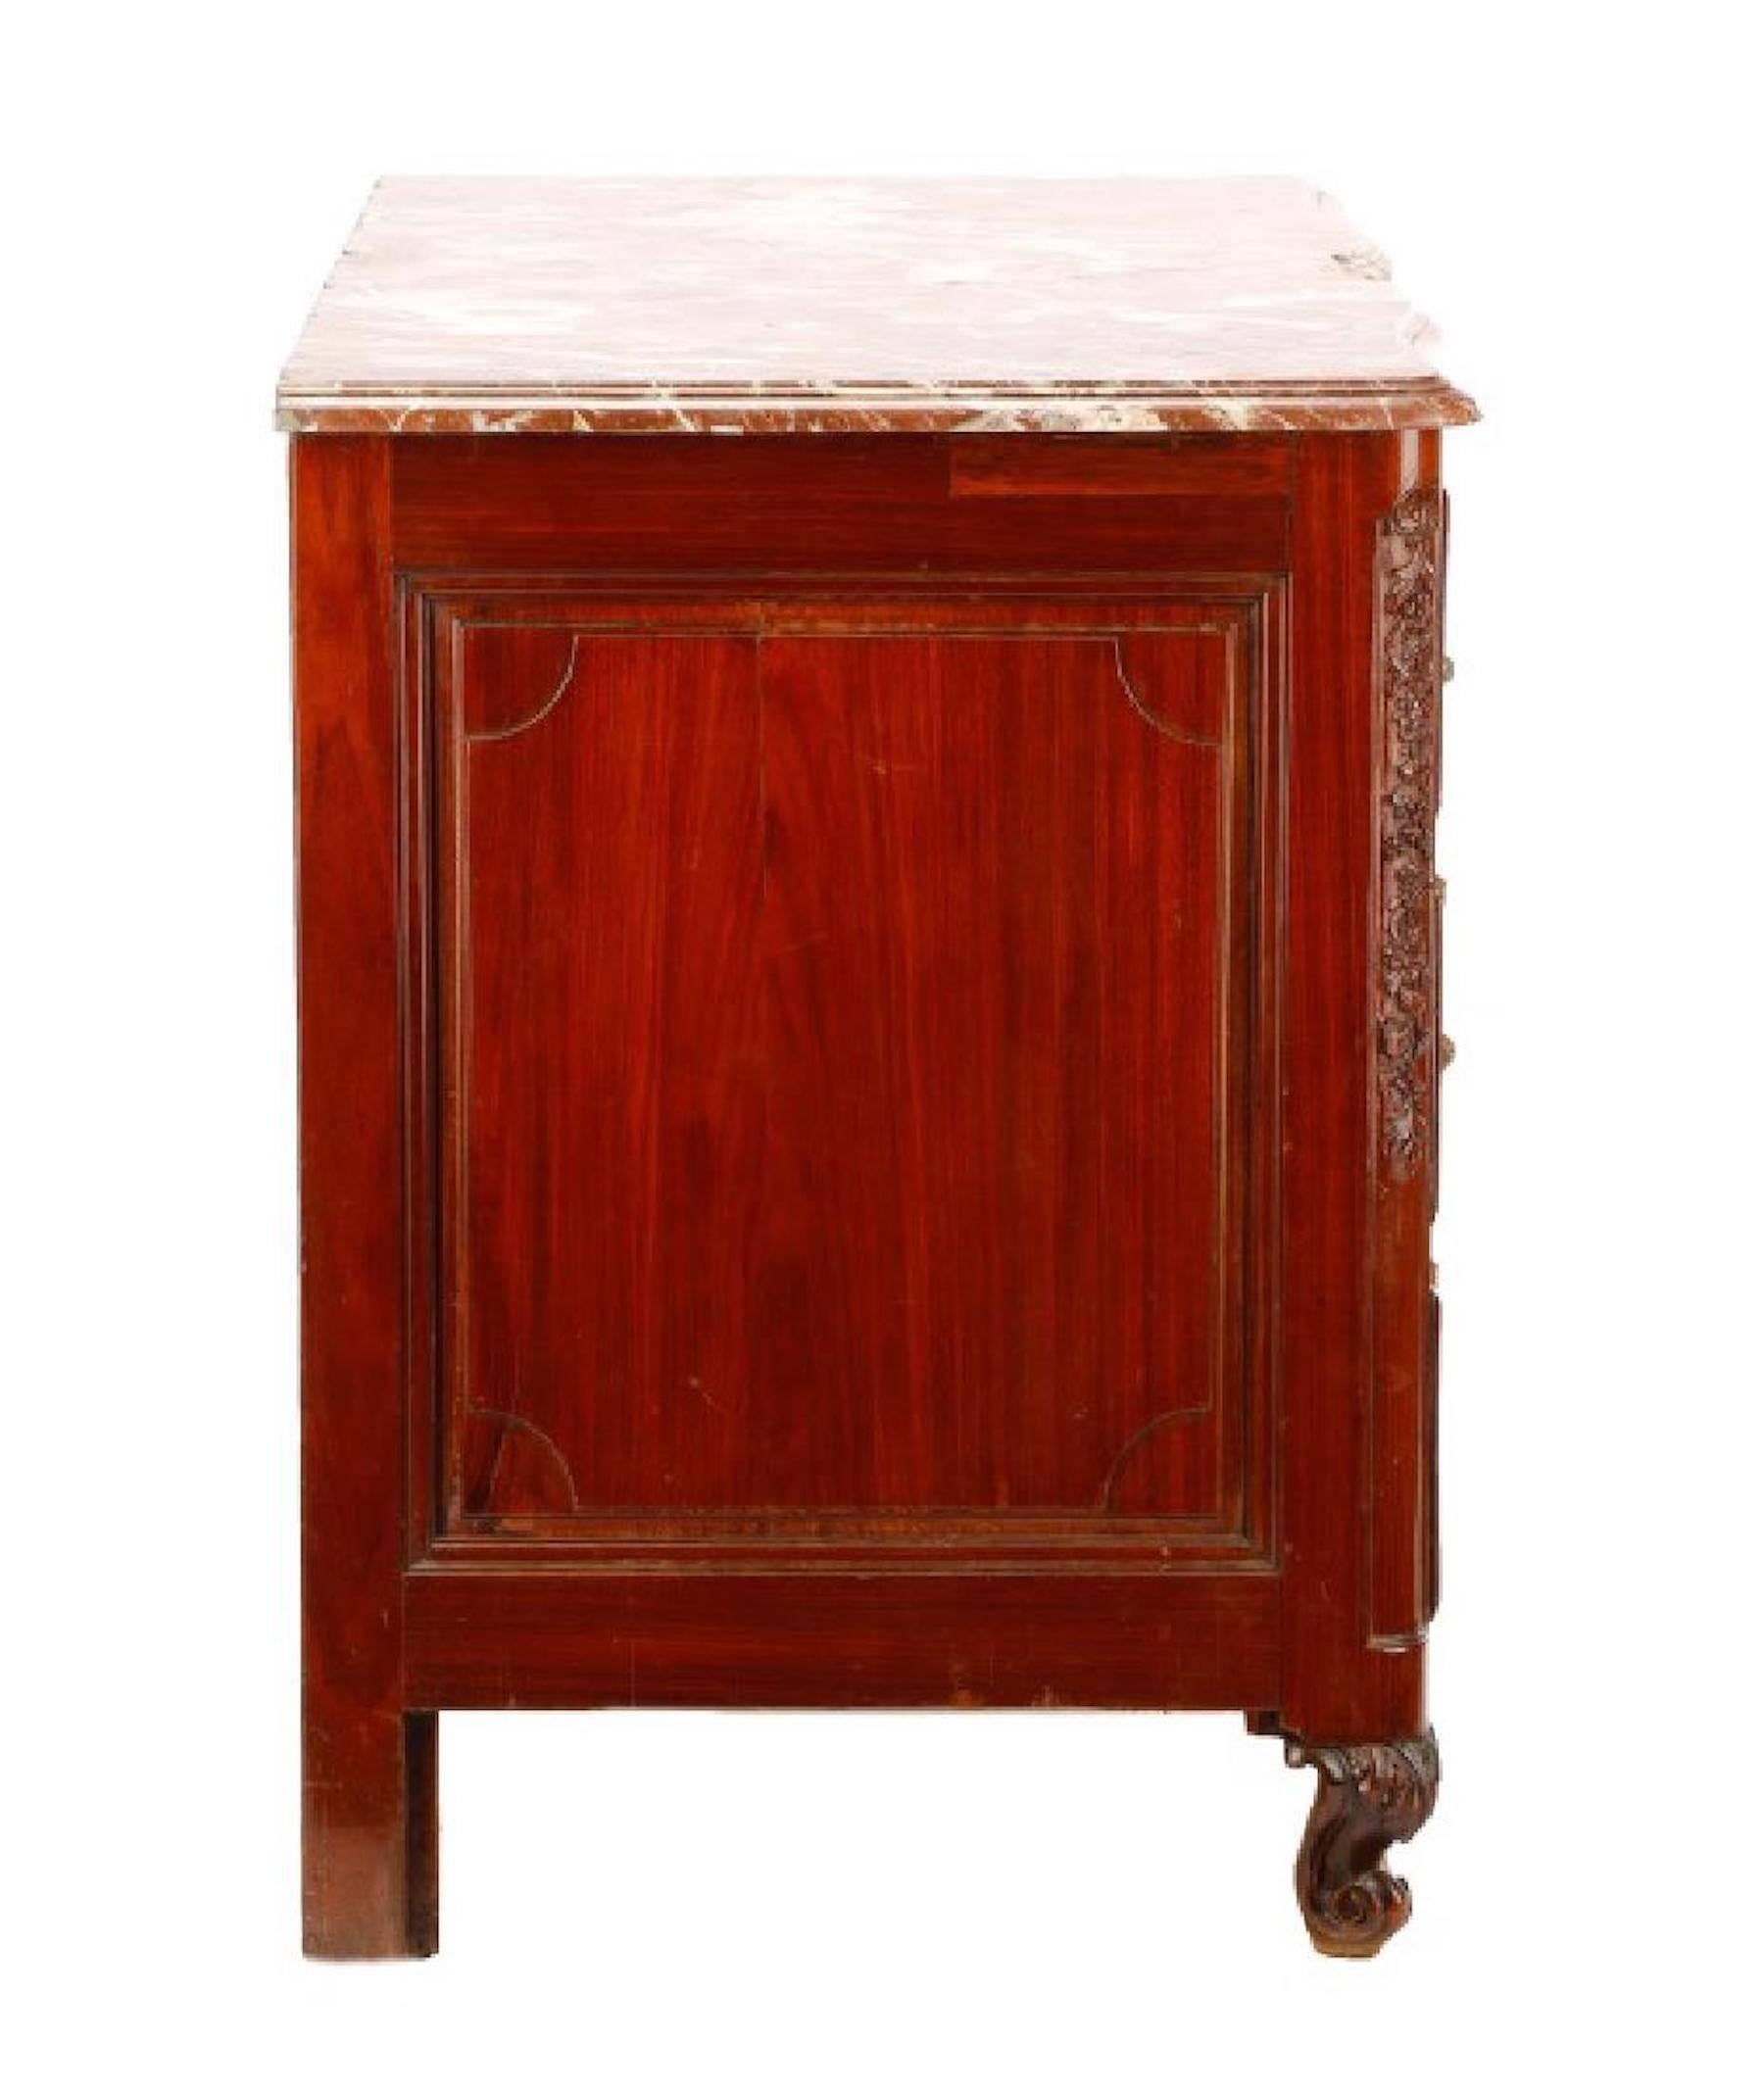 Regence chinoiserie marble-top commode, fitted with three chinoiserie ormolu-mounted long drawers. Some old repairs are evident, structurally sound, presents beautifully.

